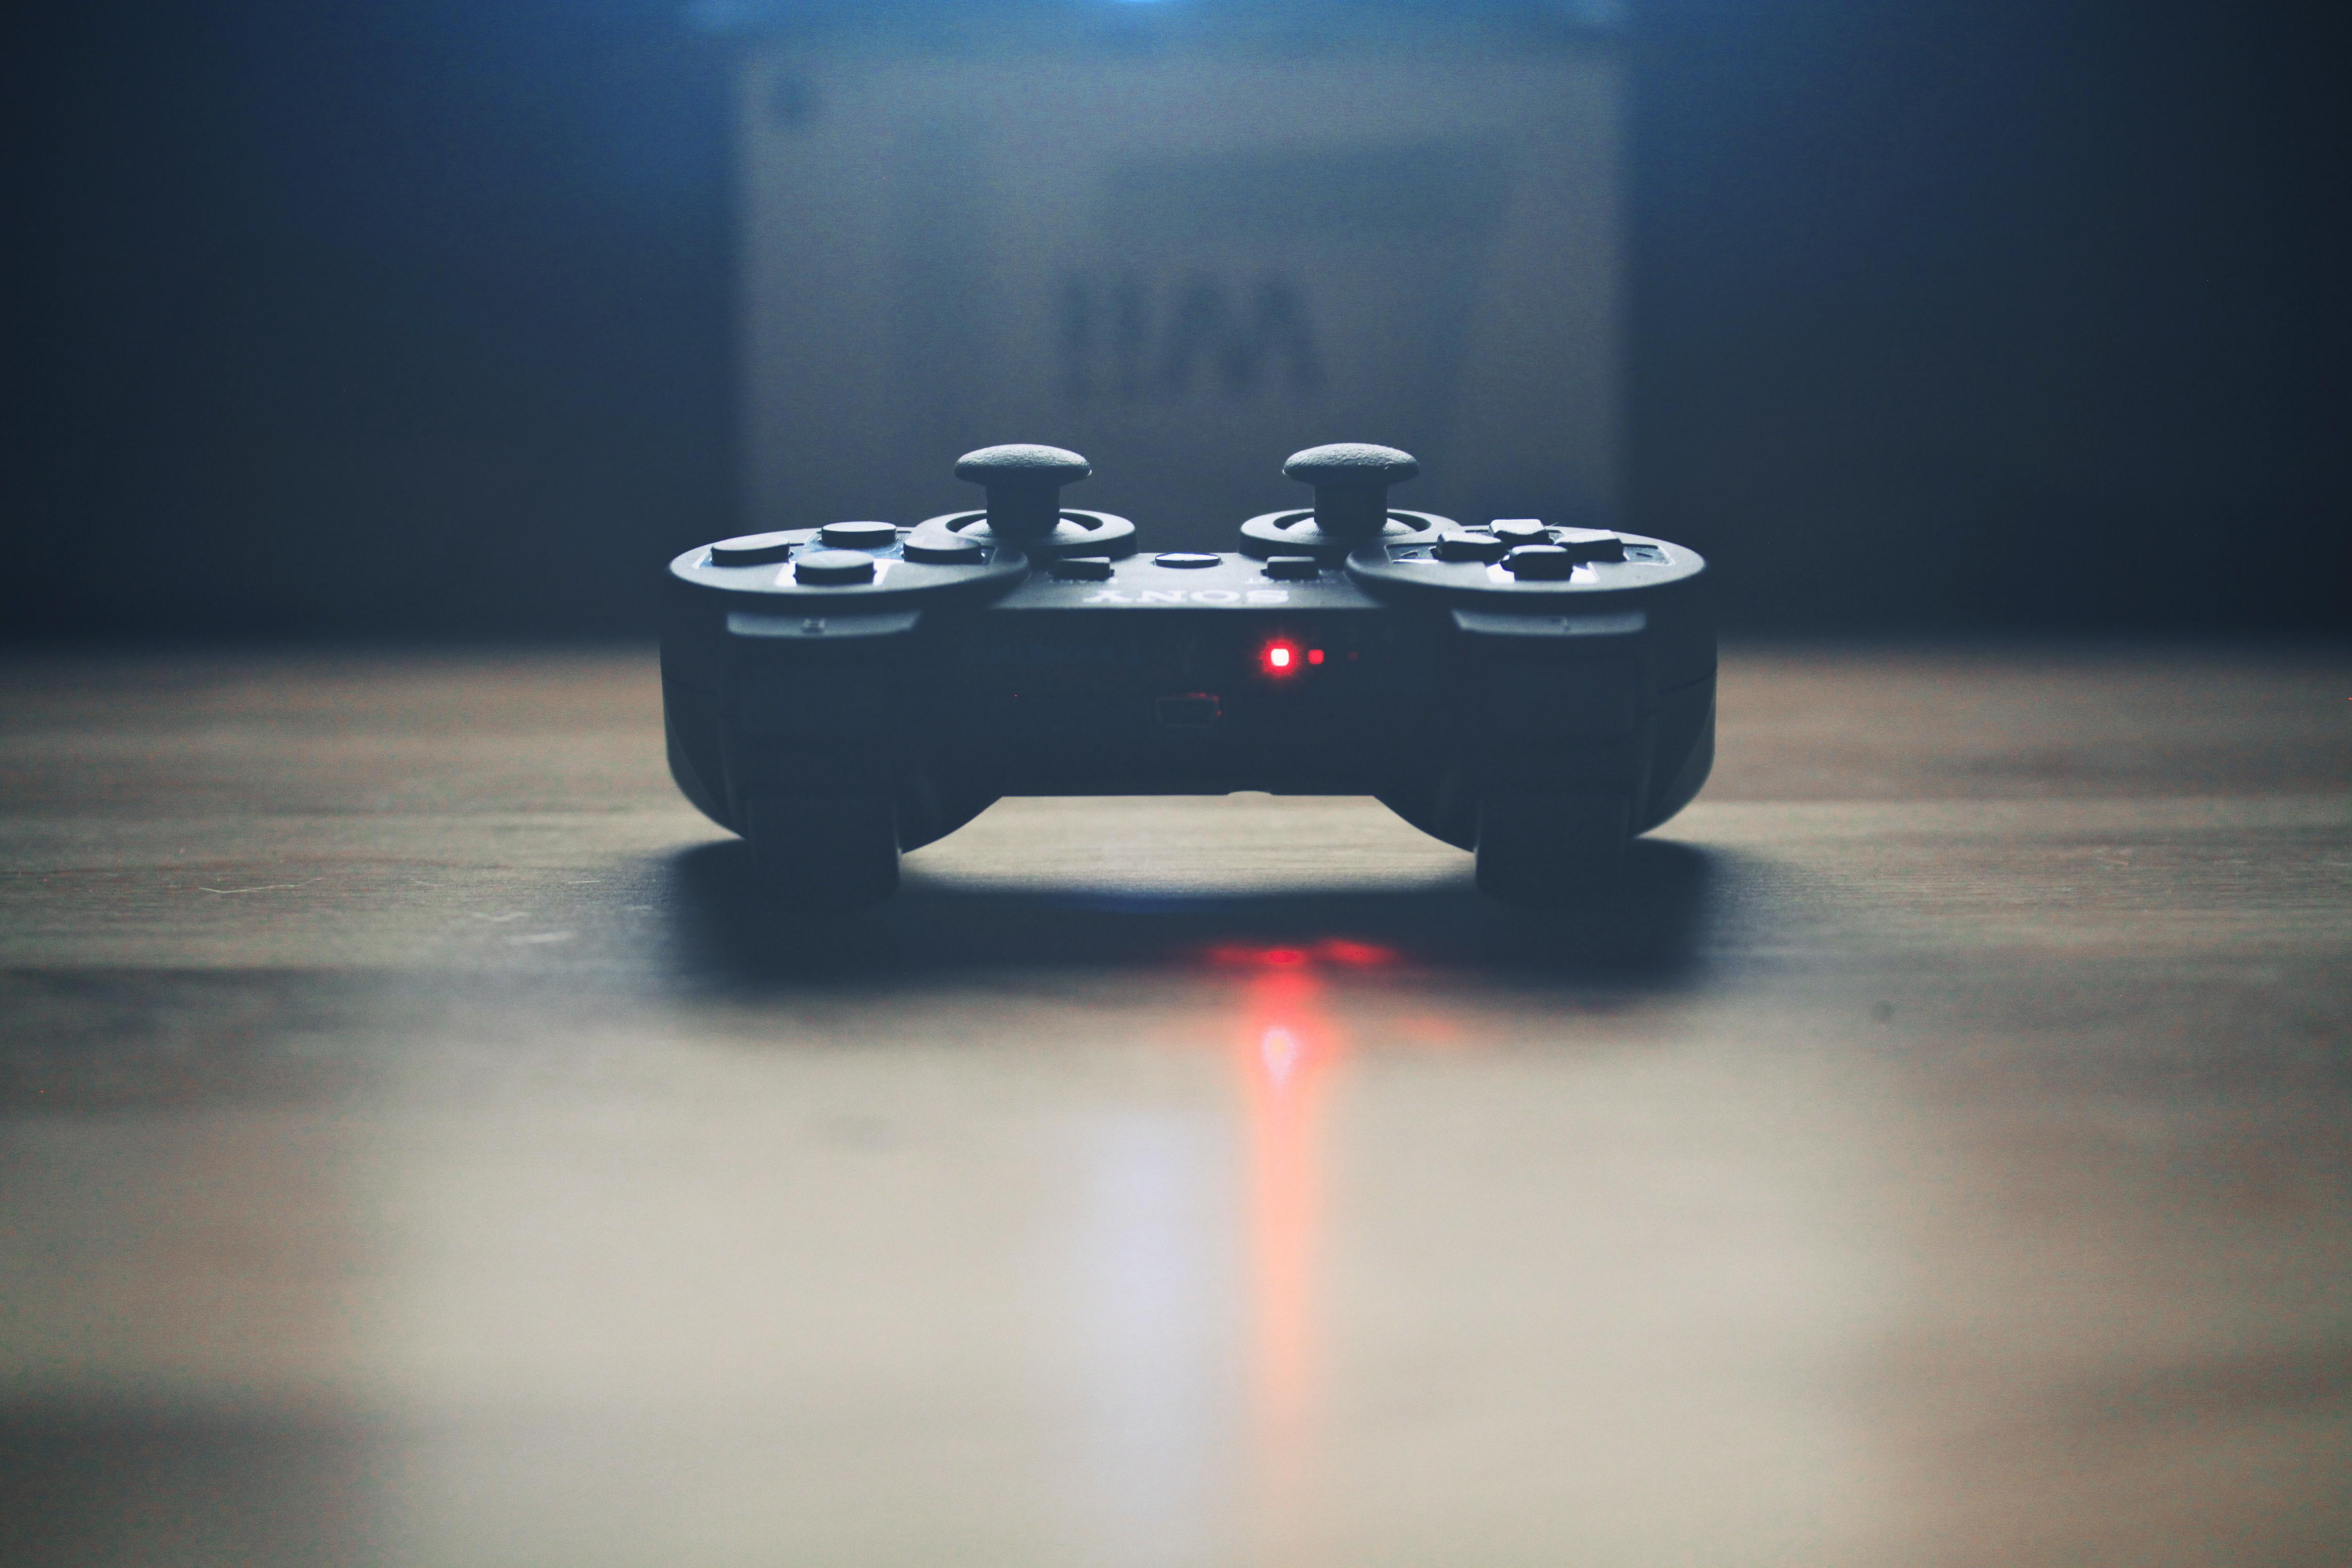 Controller Picture. Download Free Image